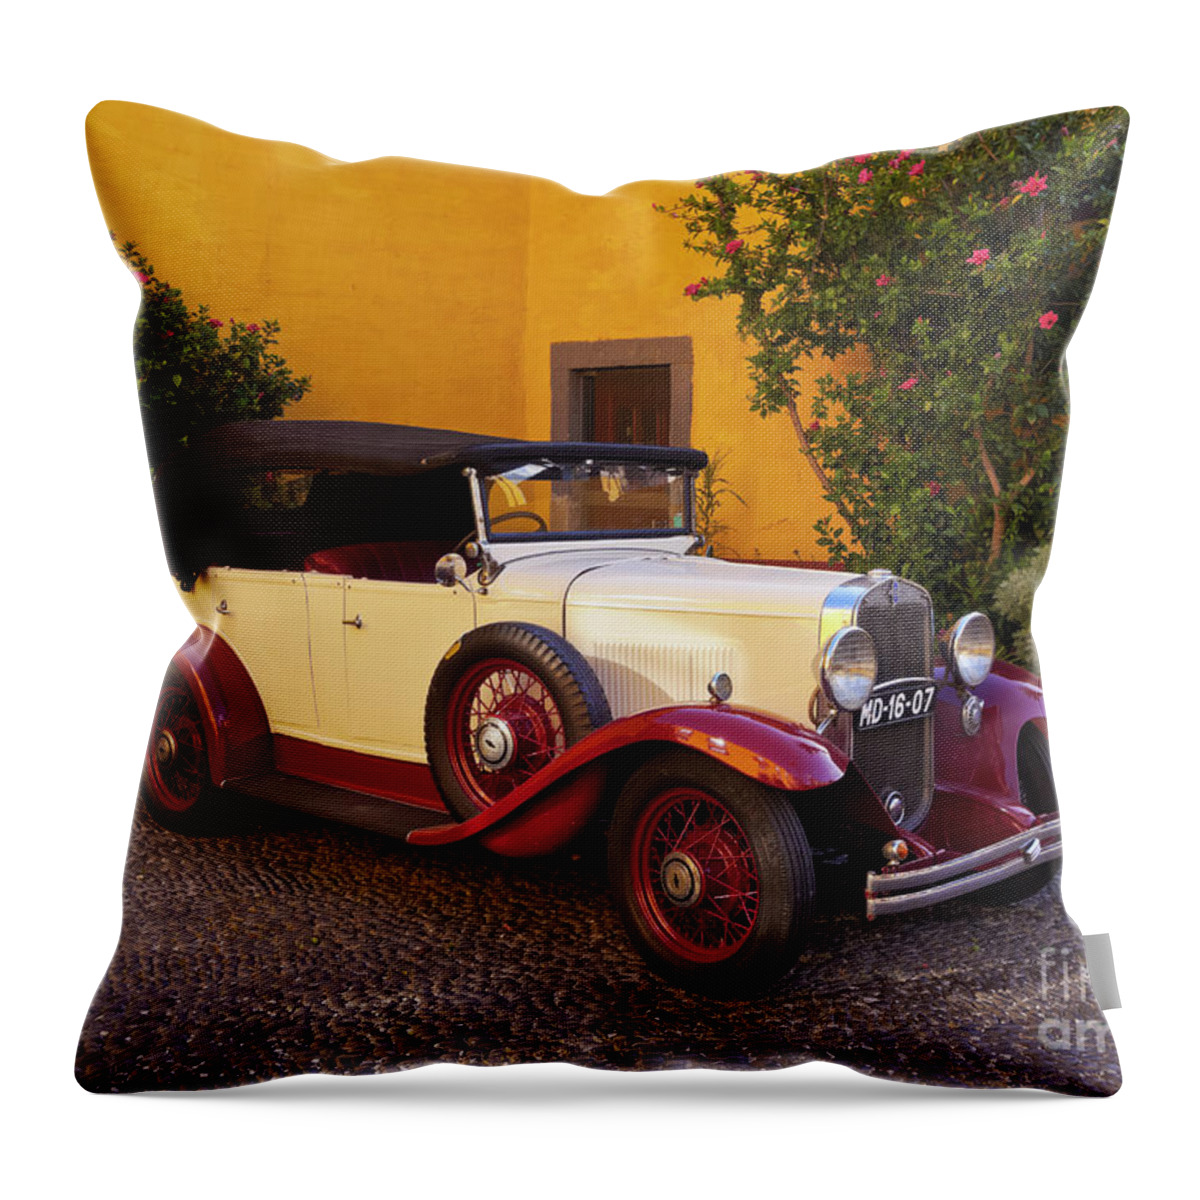 Portugal Throw Pillow featuring the photograph Vintage Car in Funchal, Madeira by Karol Kozlowski